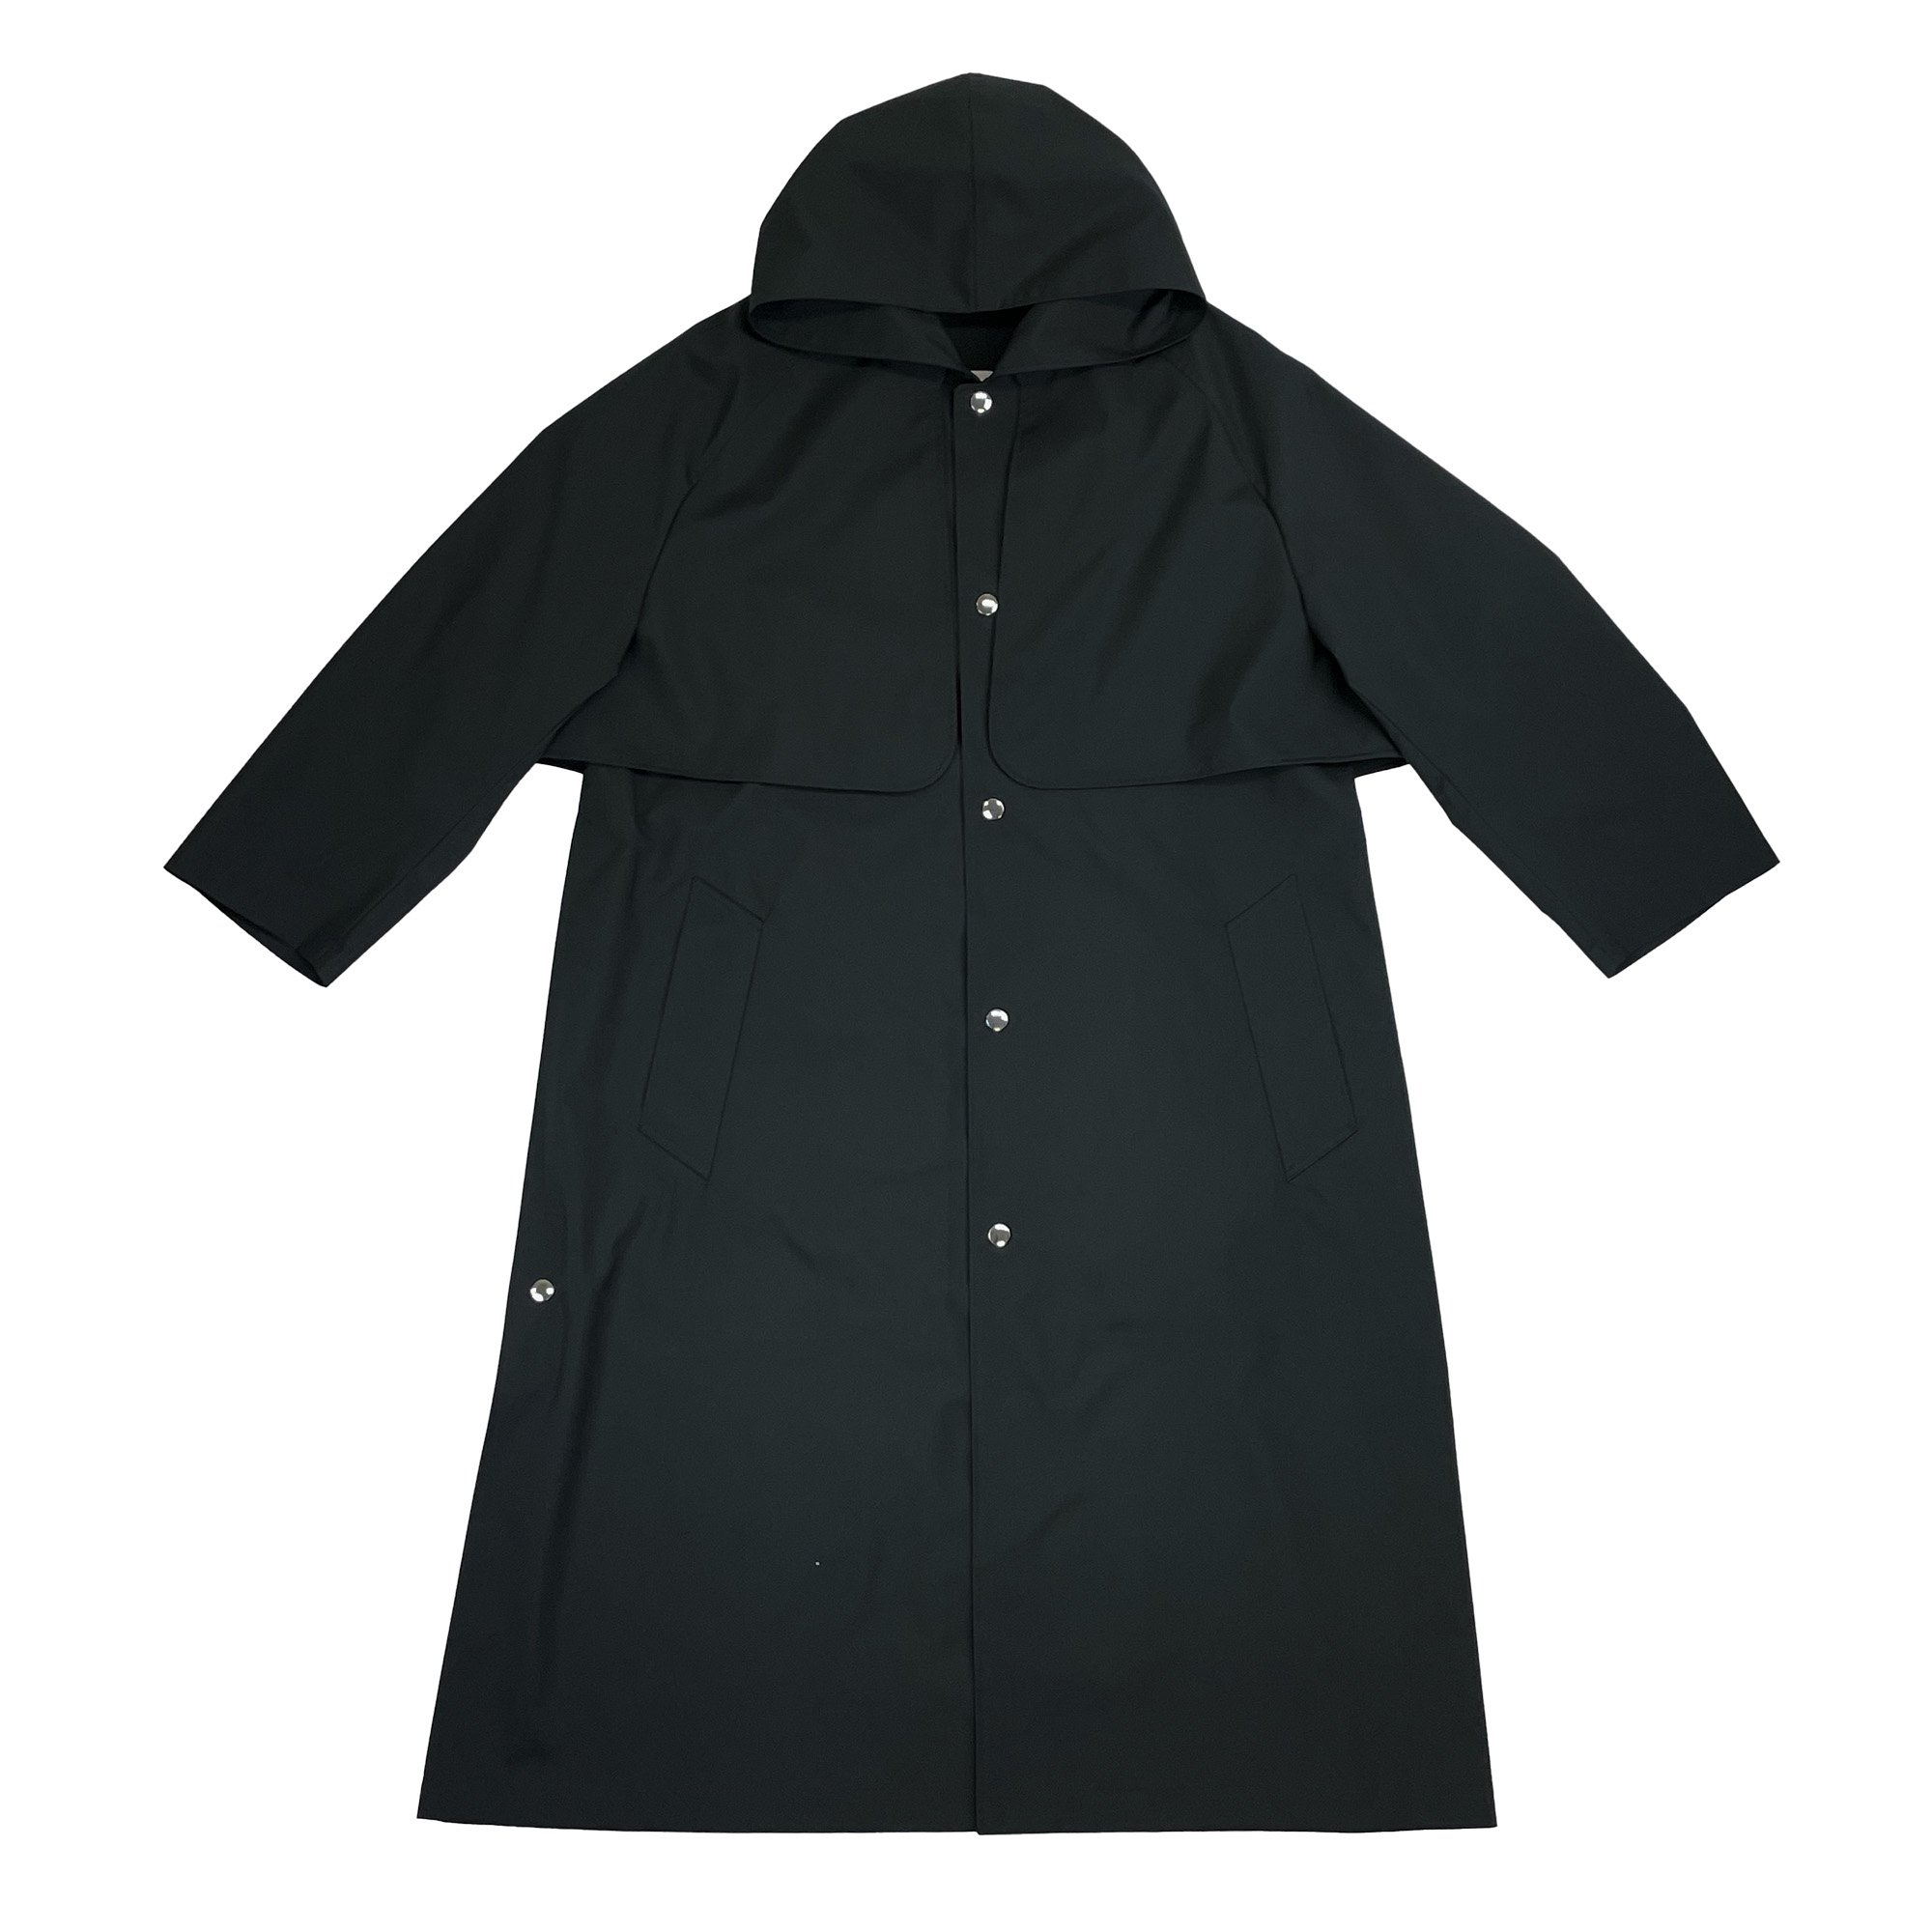 <img class='new_mark_img1' src='https://img.shop-pro.jp/img/new/icons7.gif' style='border:none;display:inline;margin:0px;padding:0px;width:auto;' />THE RERACS LIGHT SMOOTH BONDING DOCKING CAPE COAT